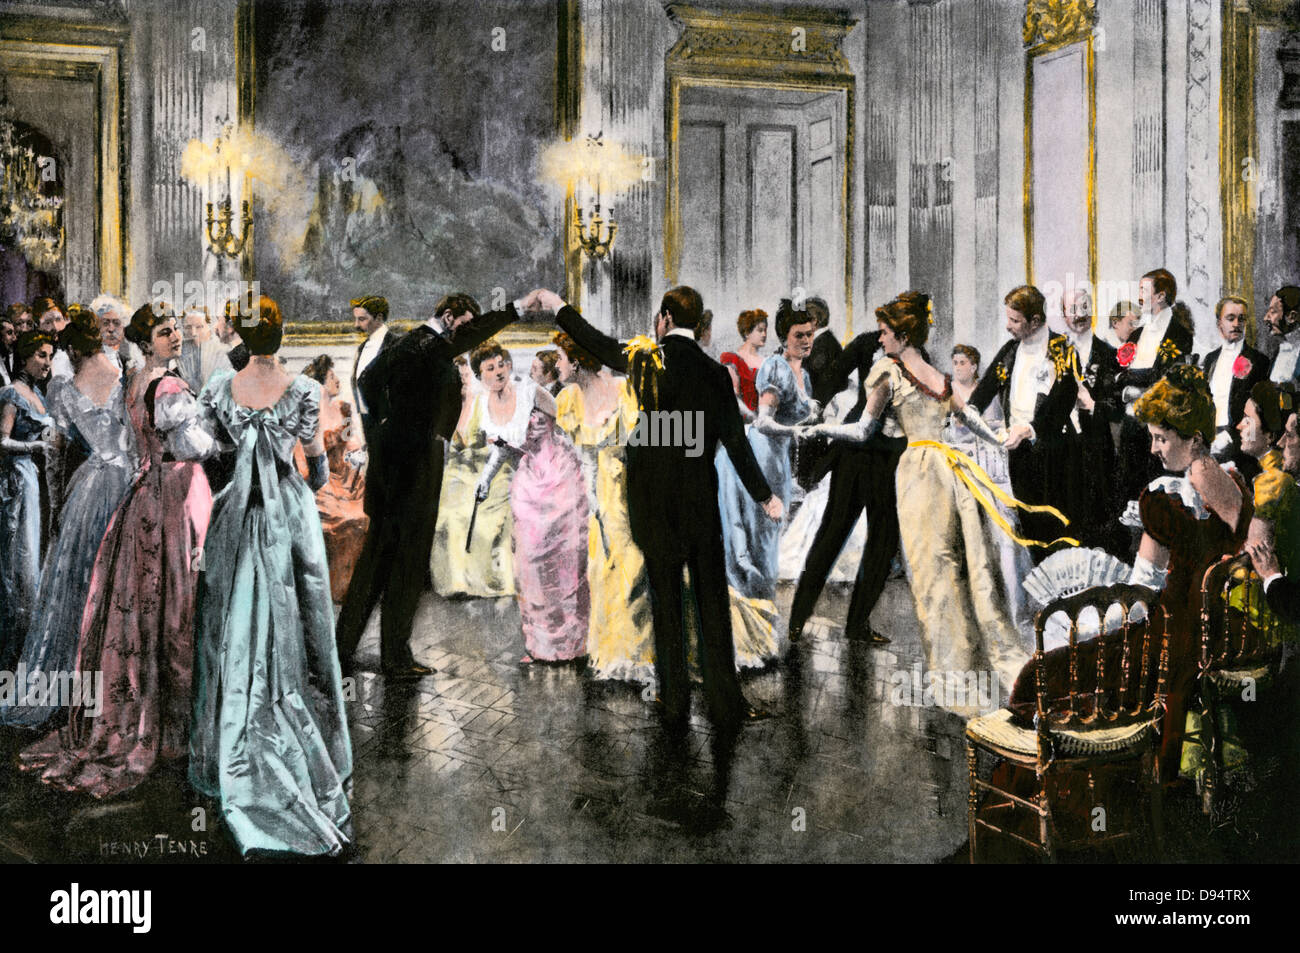 The cotillion, a formal dance circa 1900. Hand-colored halftone of a painting by Henri Tenre Stock Photo